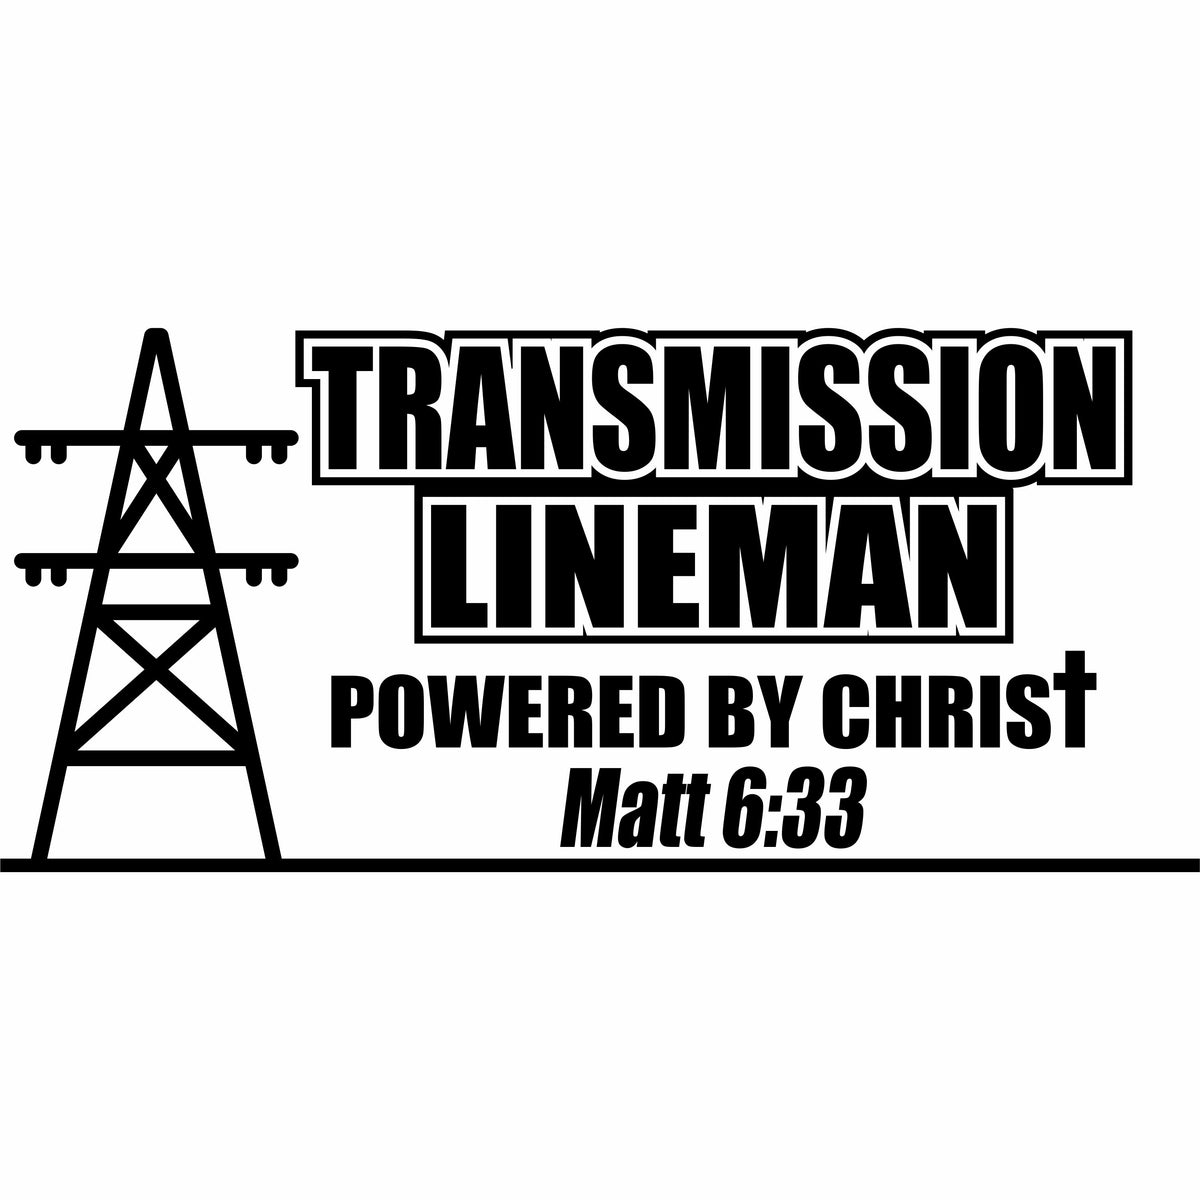 Transmission Lineman Powered by Christ Vinyl Decal Free Shipping